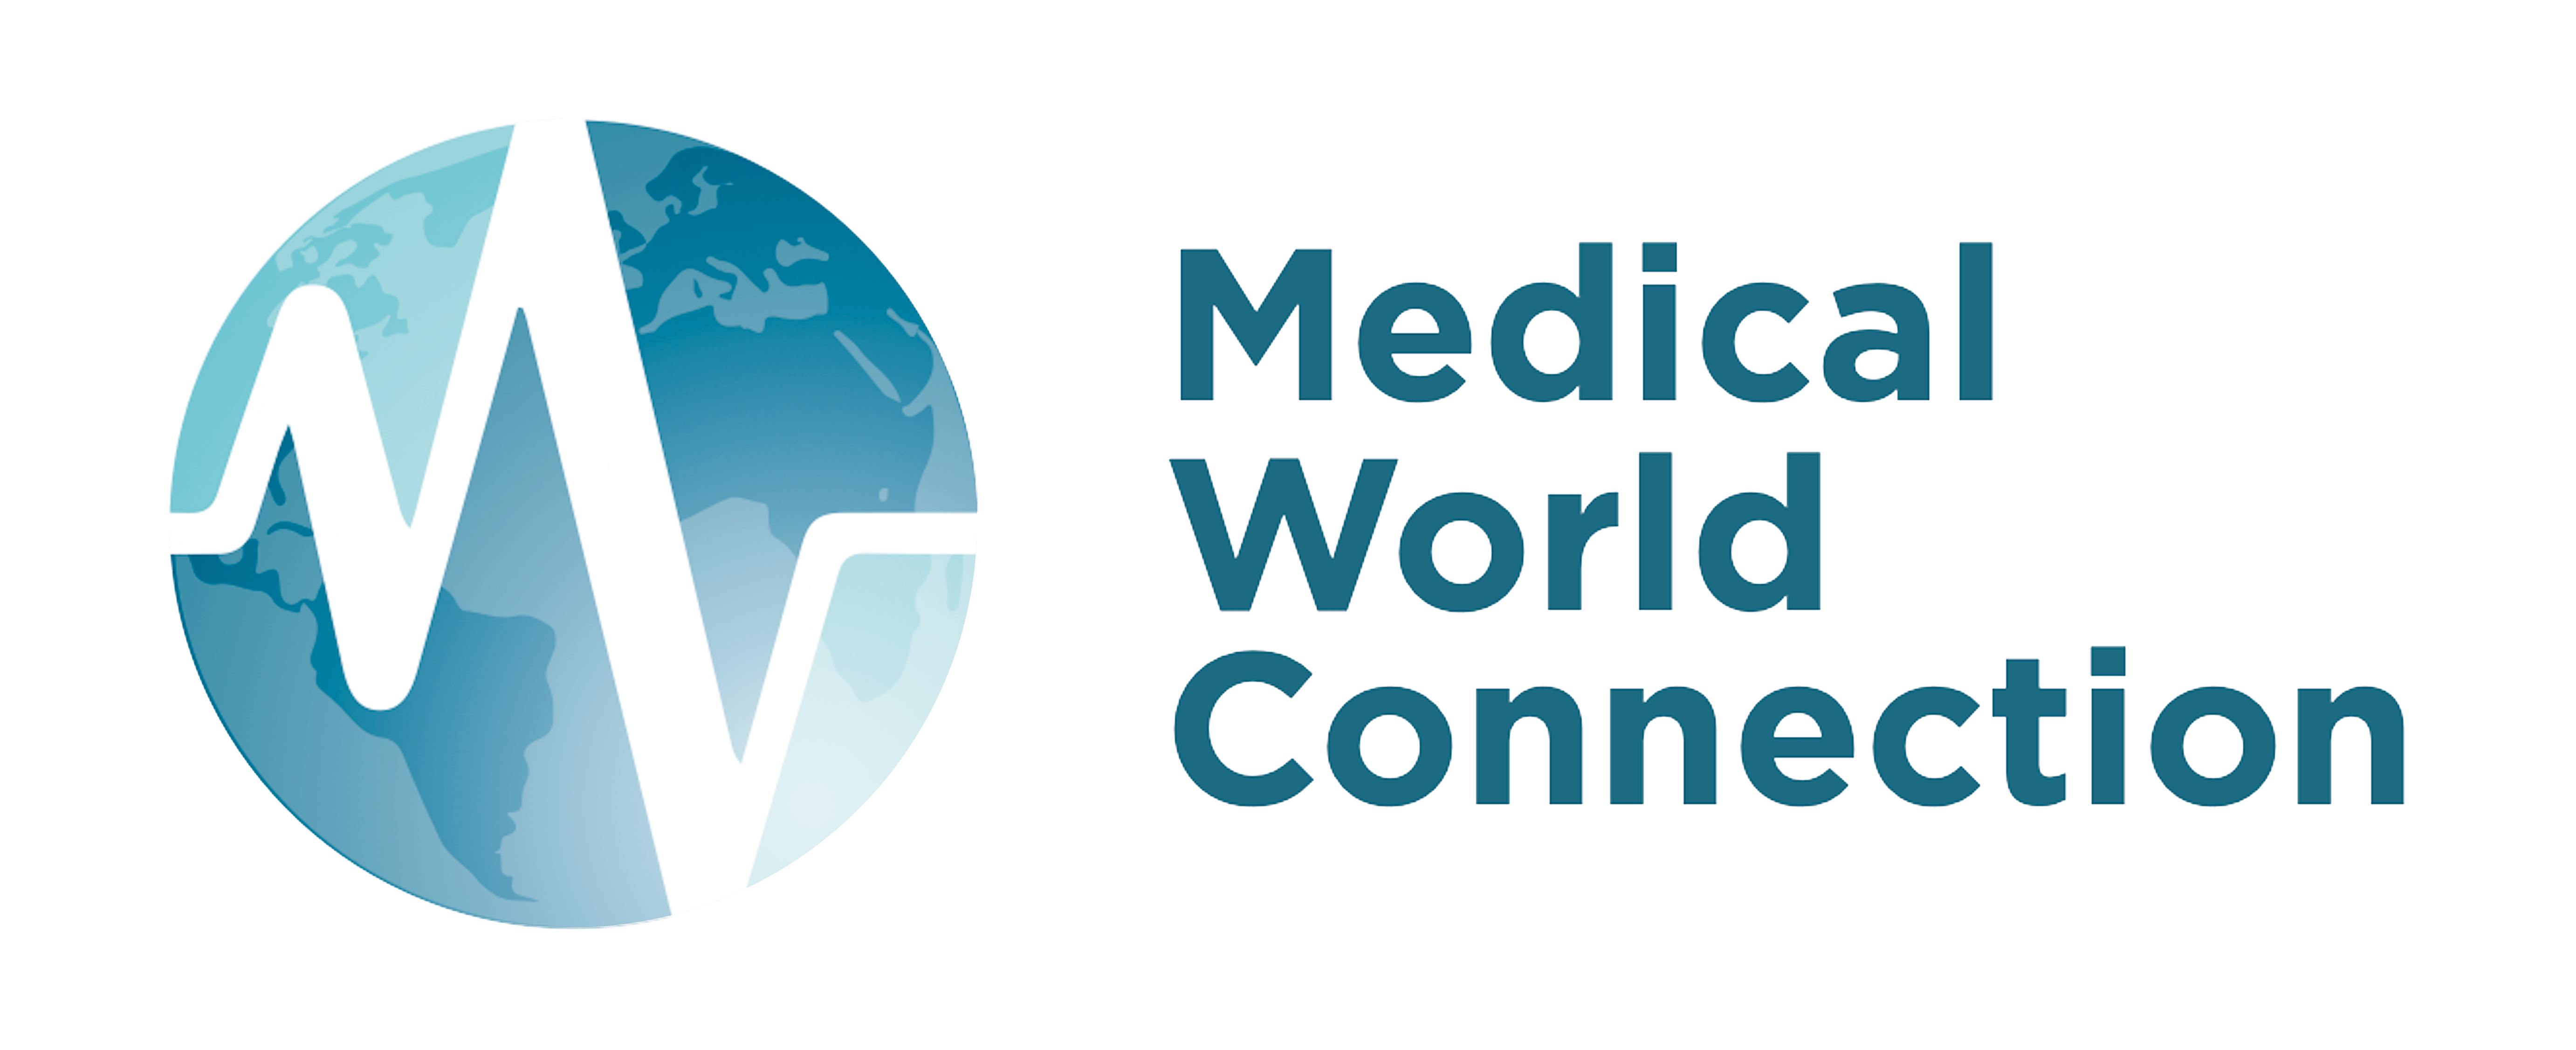 Medical World Connection